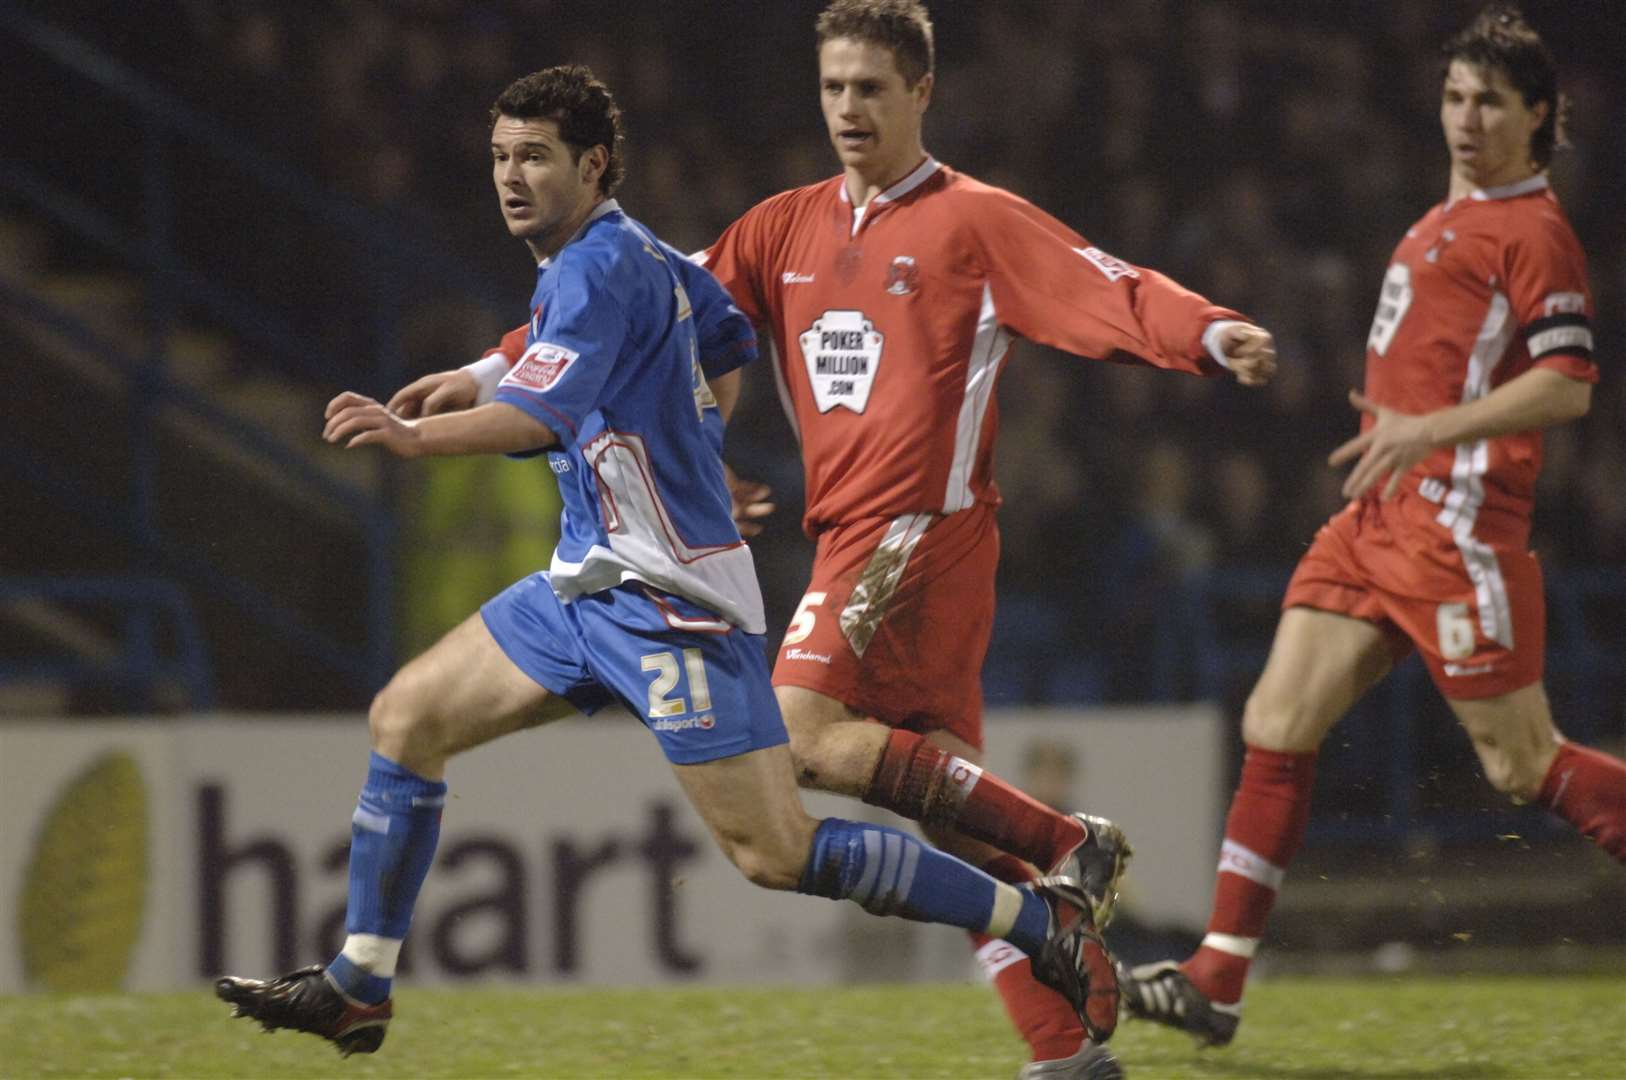 Matt Jarvis in action for the Gills back in 2006